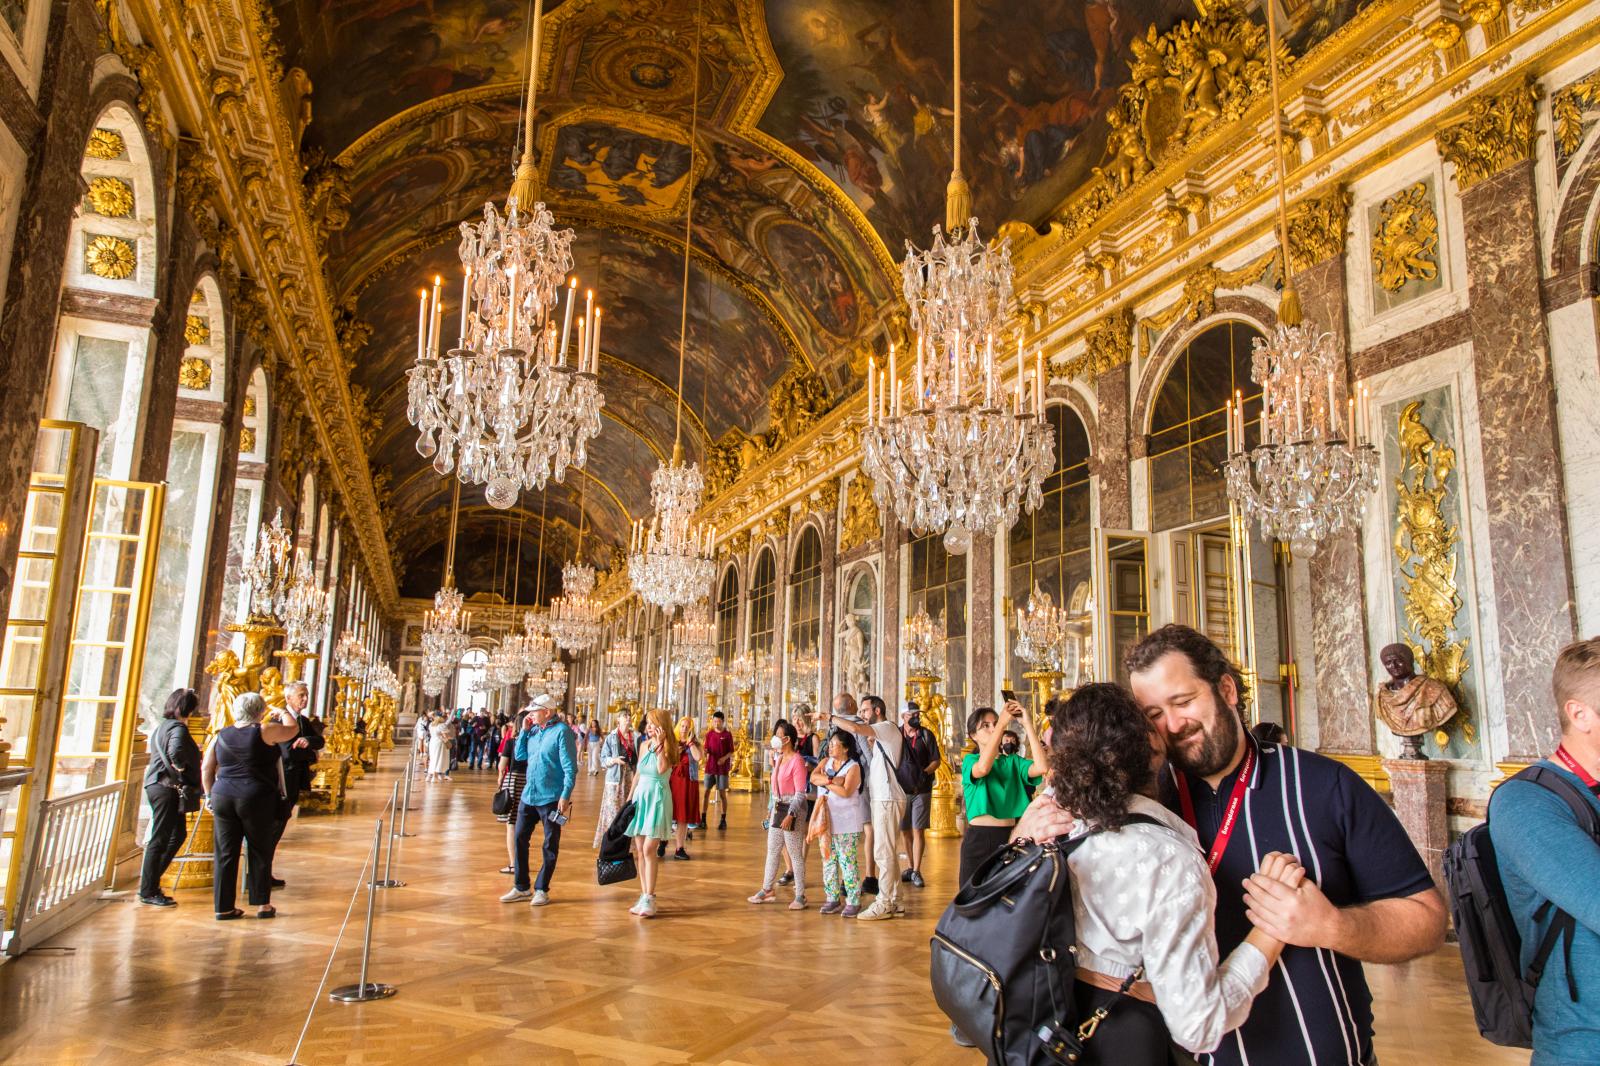 Dancing in the Palace of Versailles